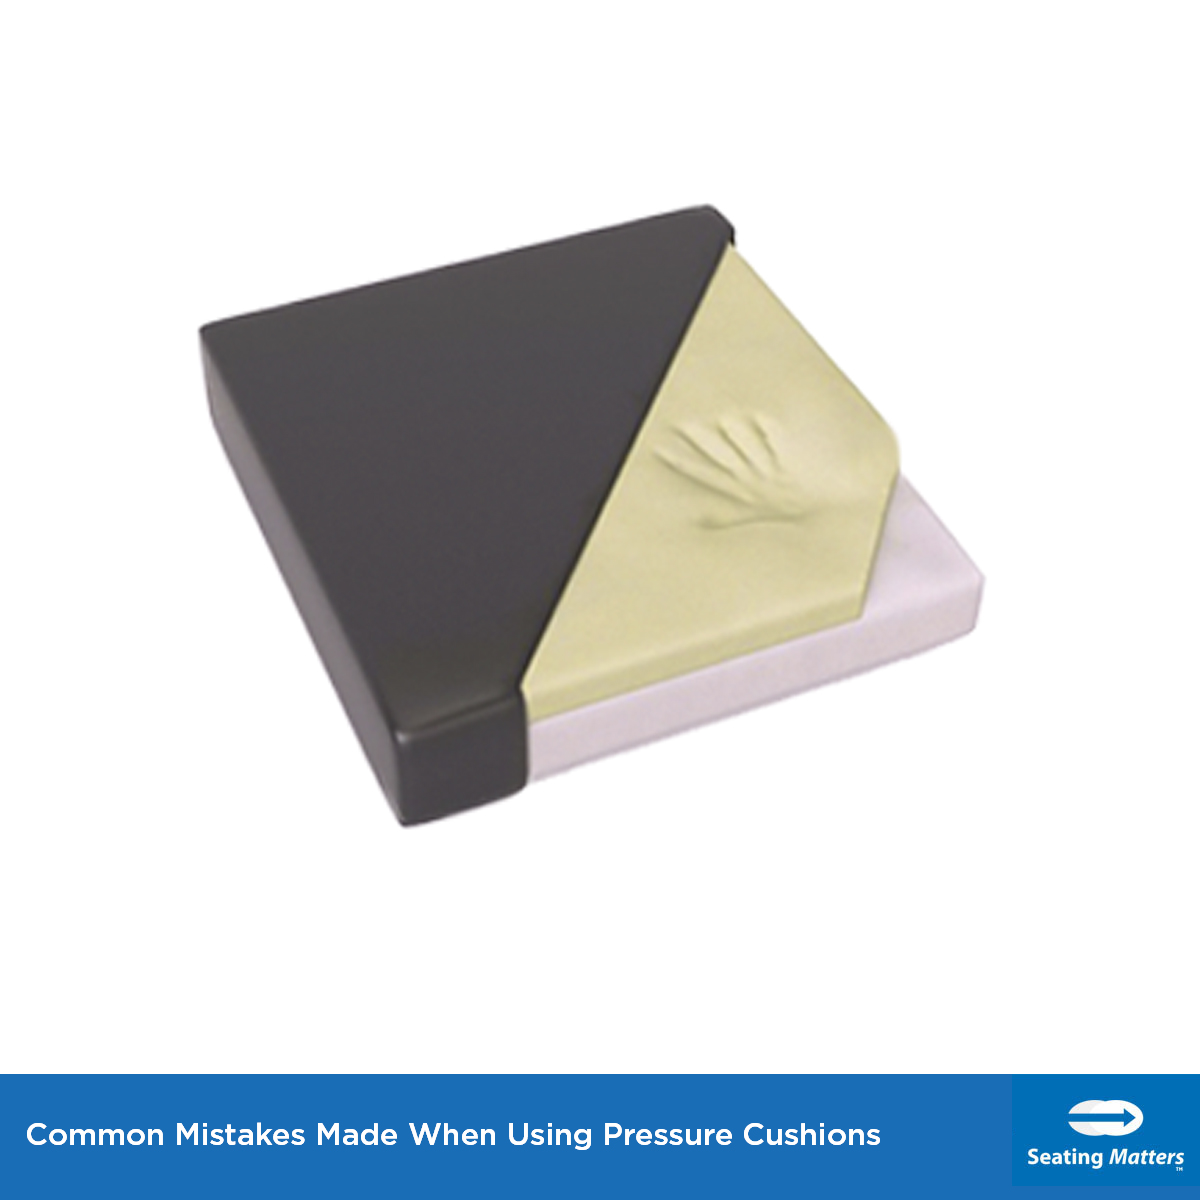 Common Mistakes Made When Using Pressure Cushions